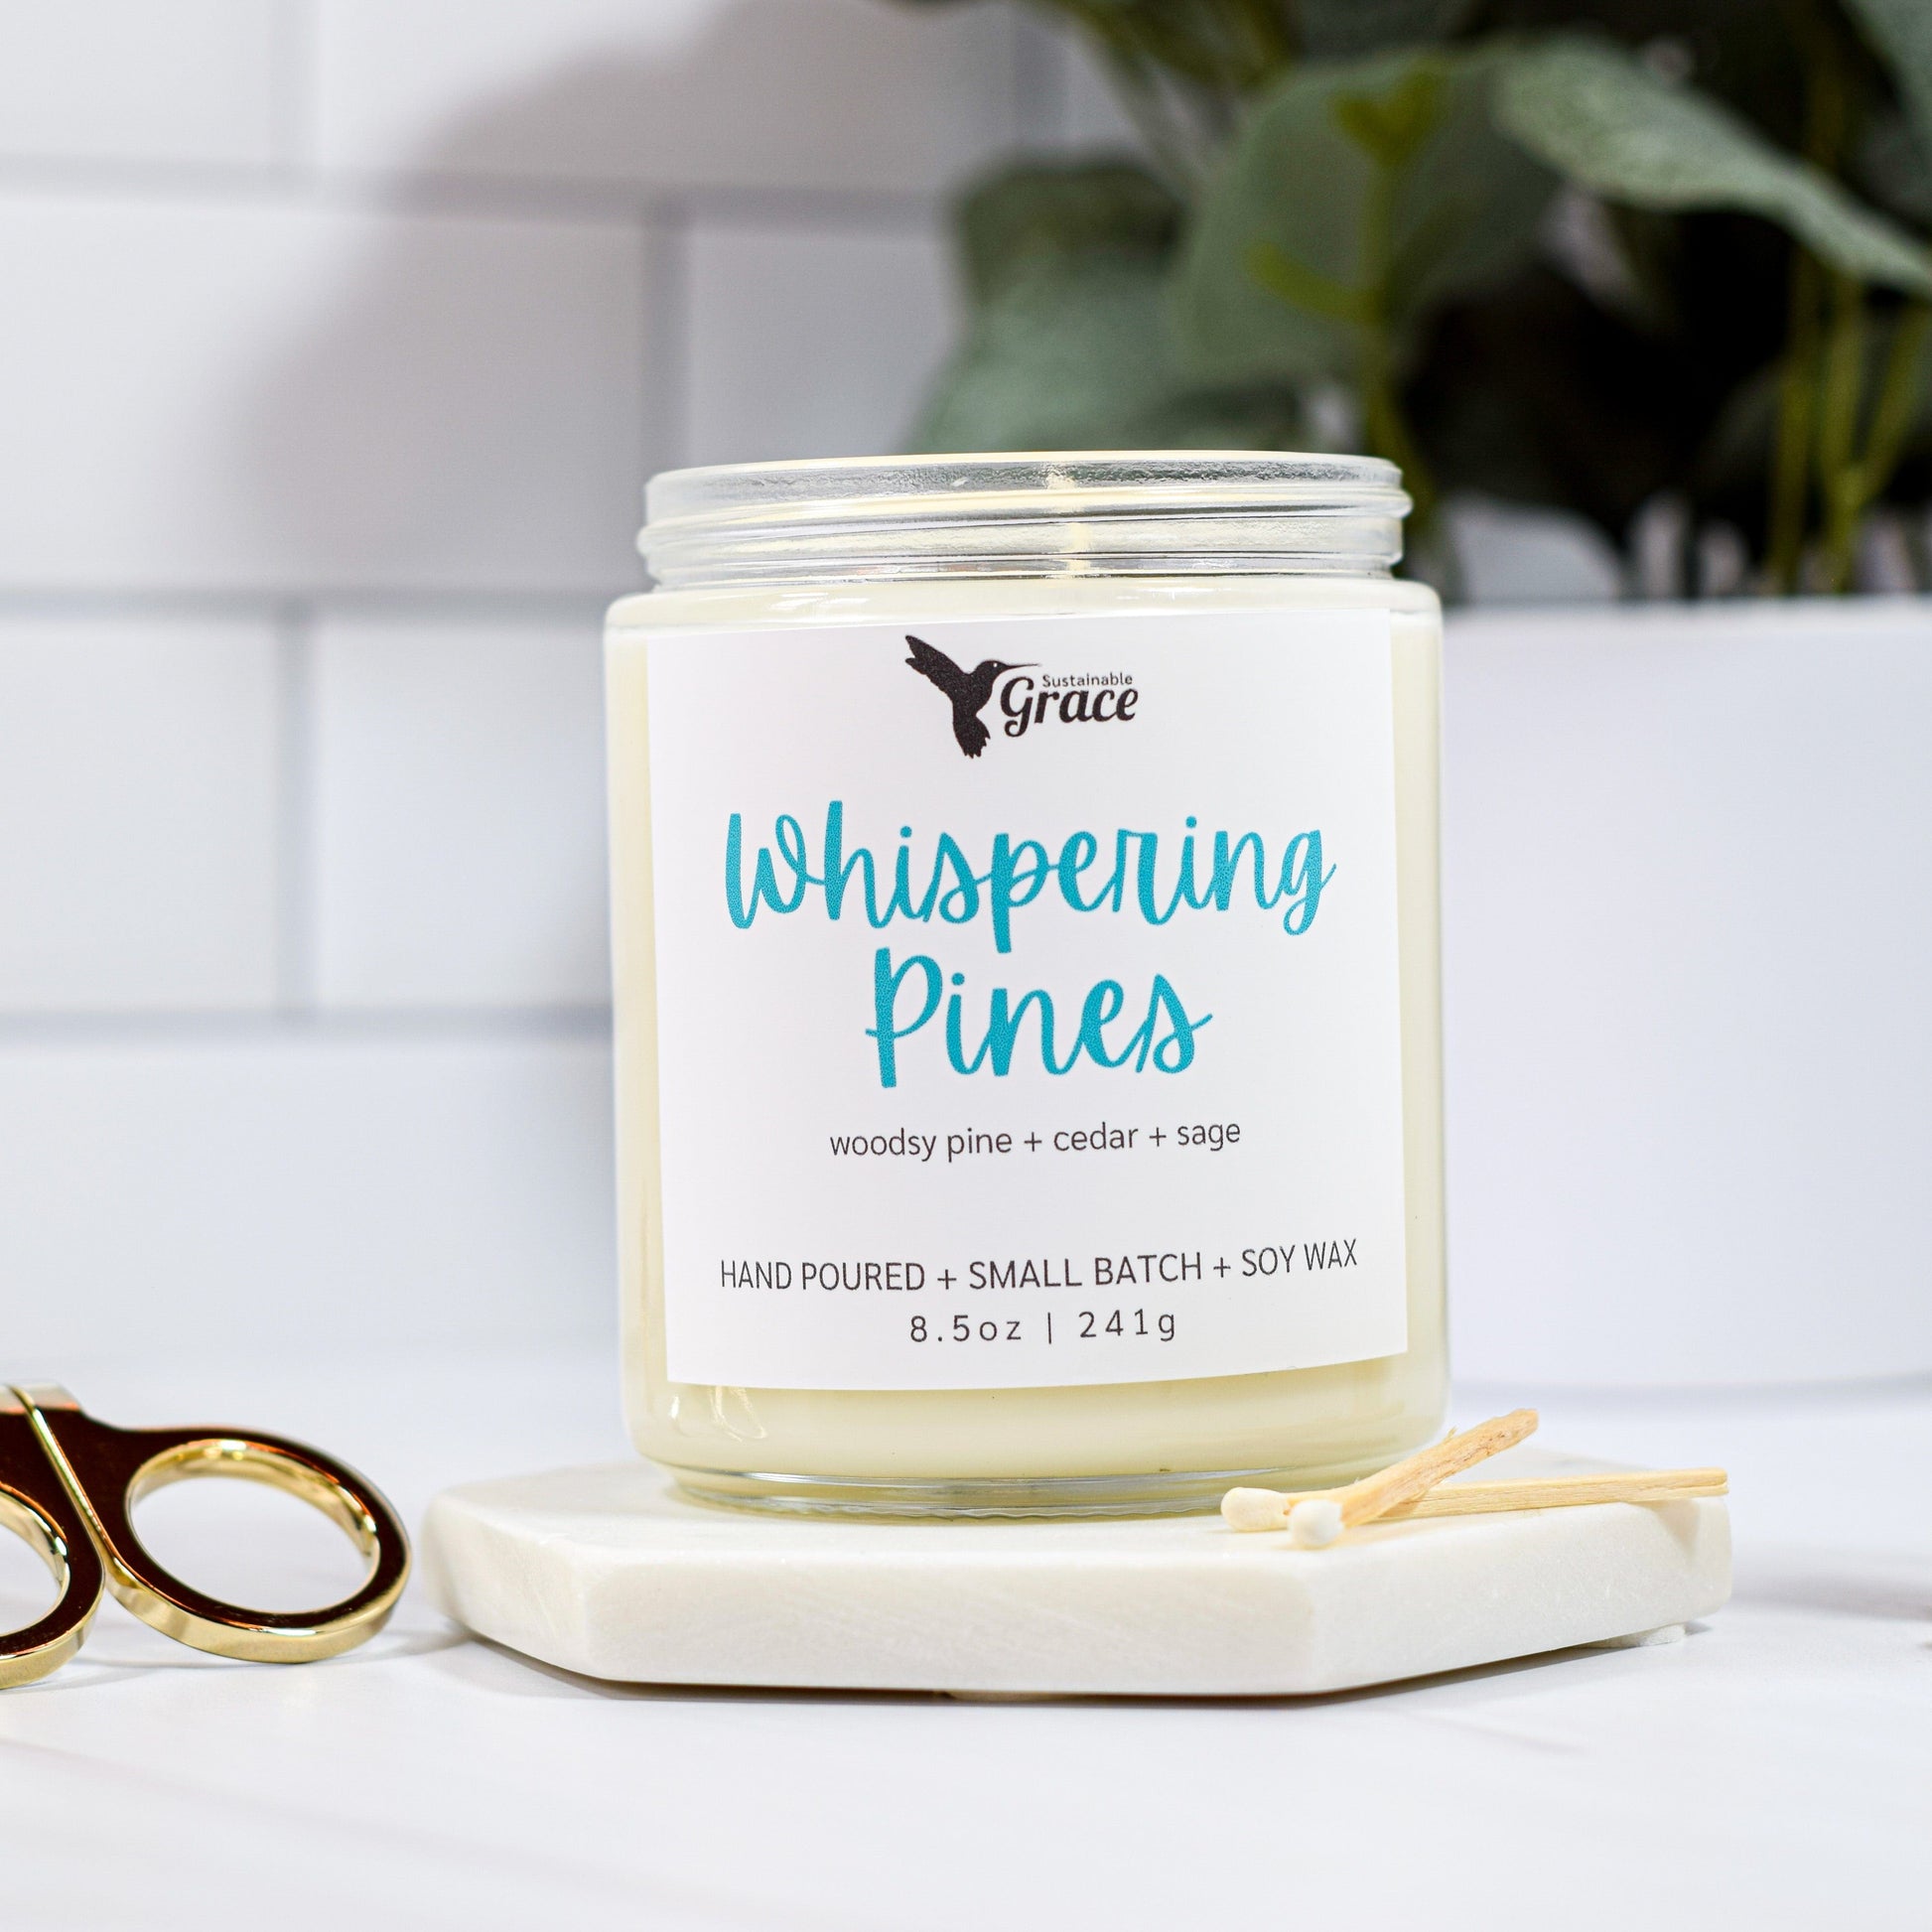 Whispering Pines soy candle pine and sage scent